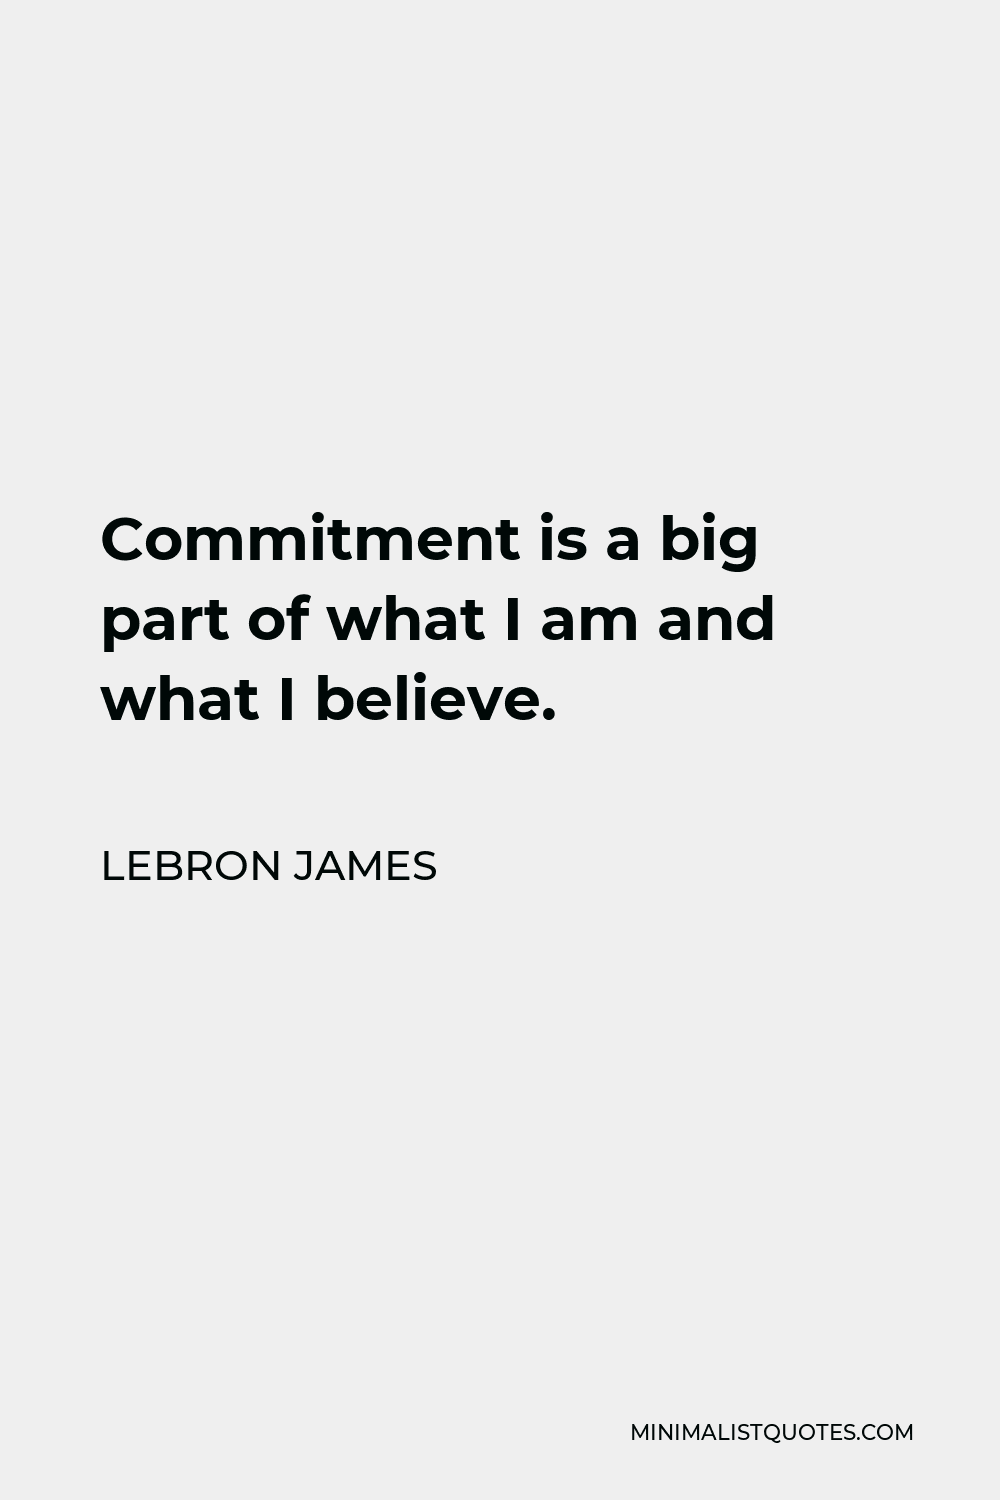 LeBron James Quote - Commitment is a big part of what I am and what I believe.